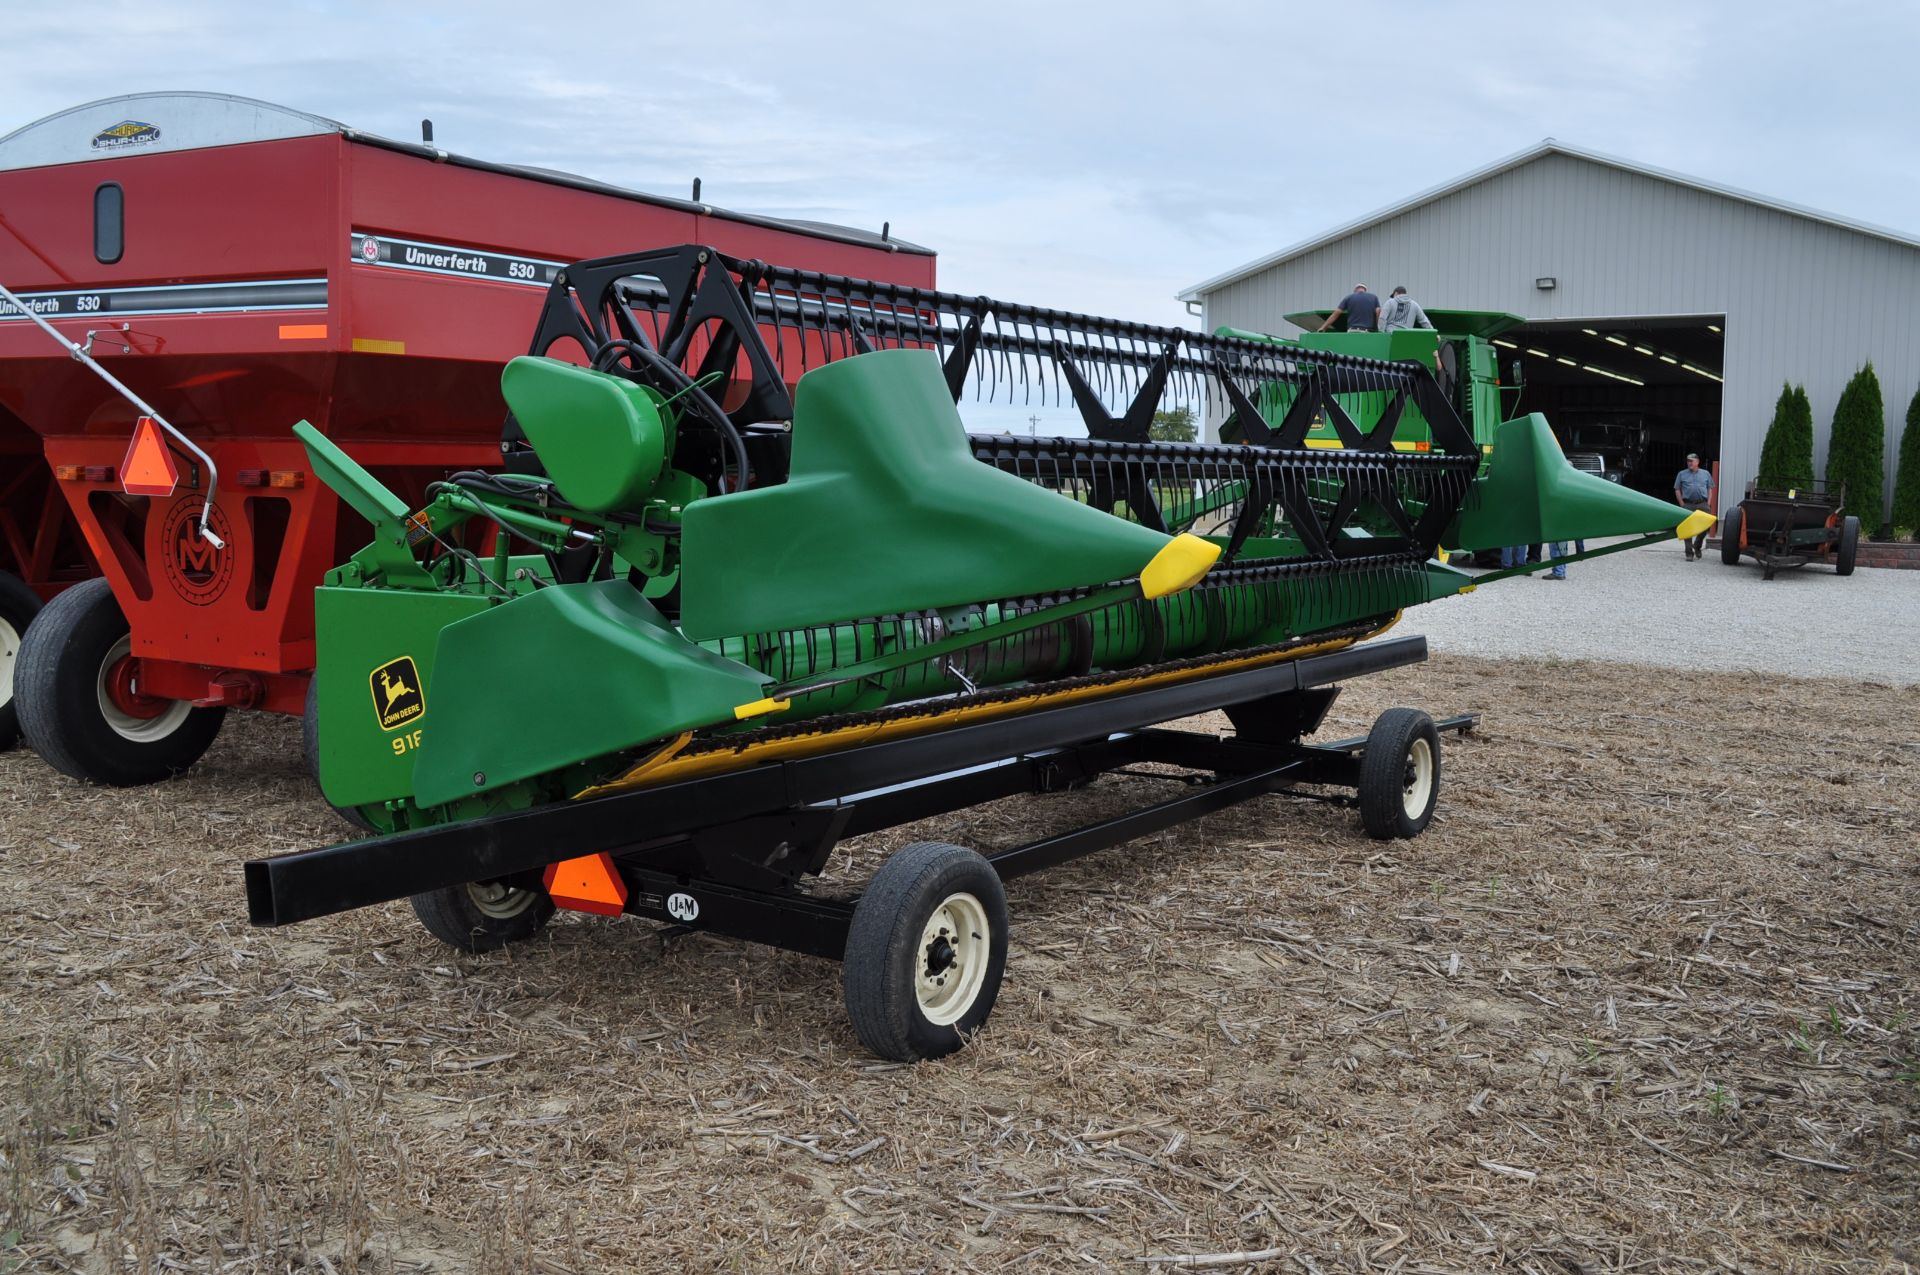 18’ John Deere 918 grain head, hyd fore/aft, row crop dividers, poly skid shoes, SN H00918F670831 - Image 4 of 10